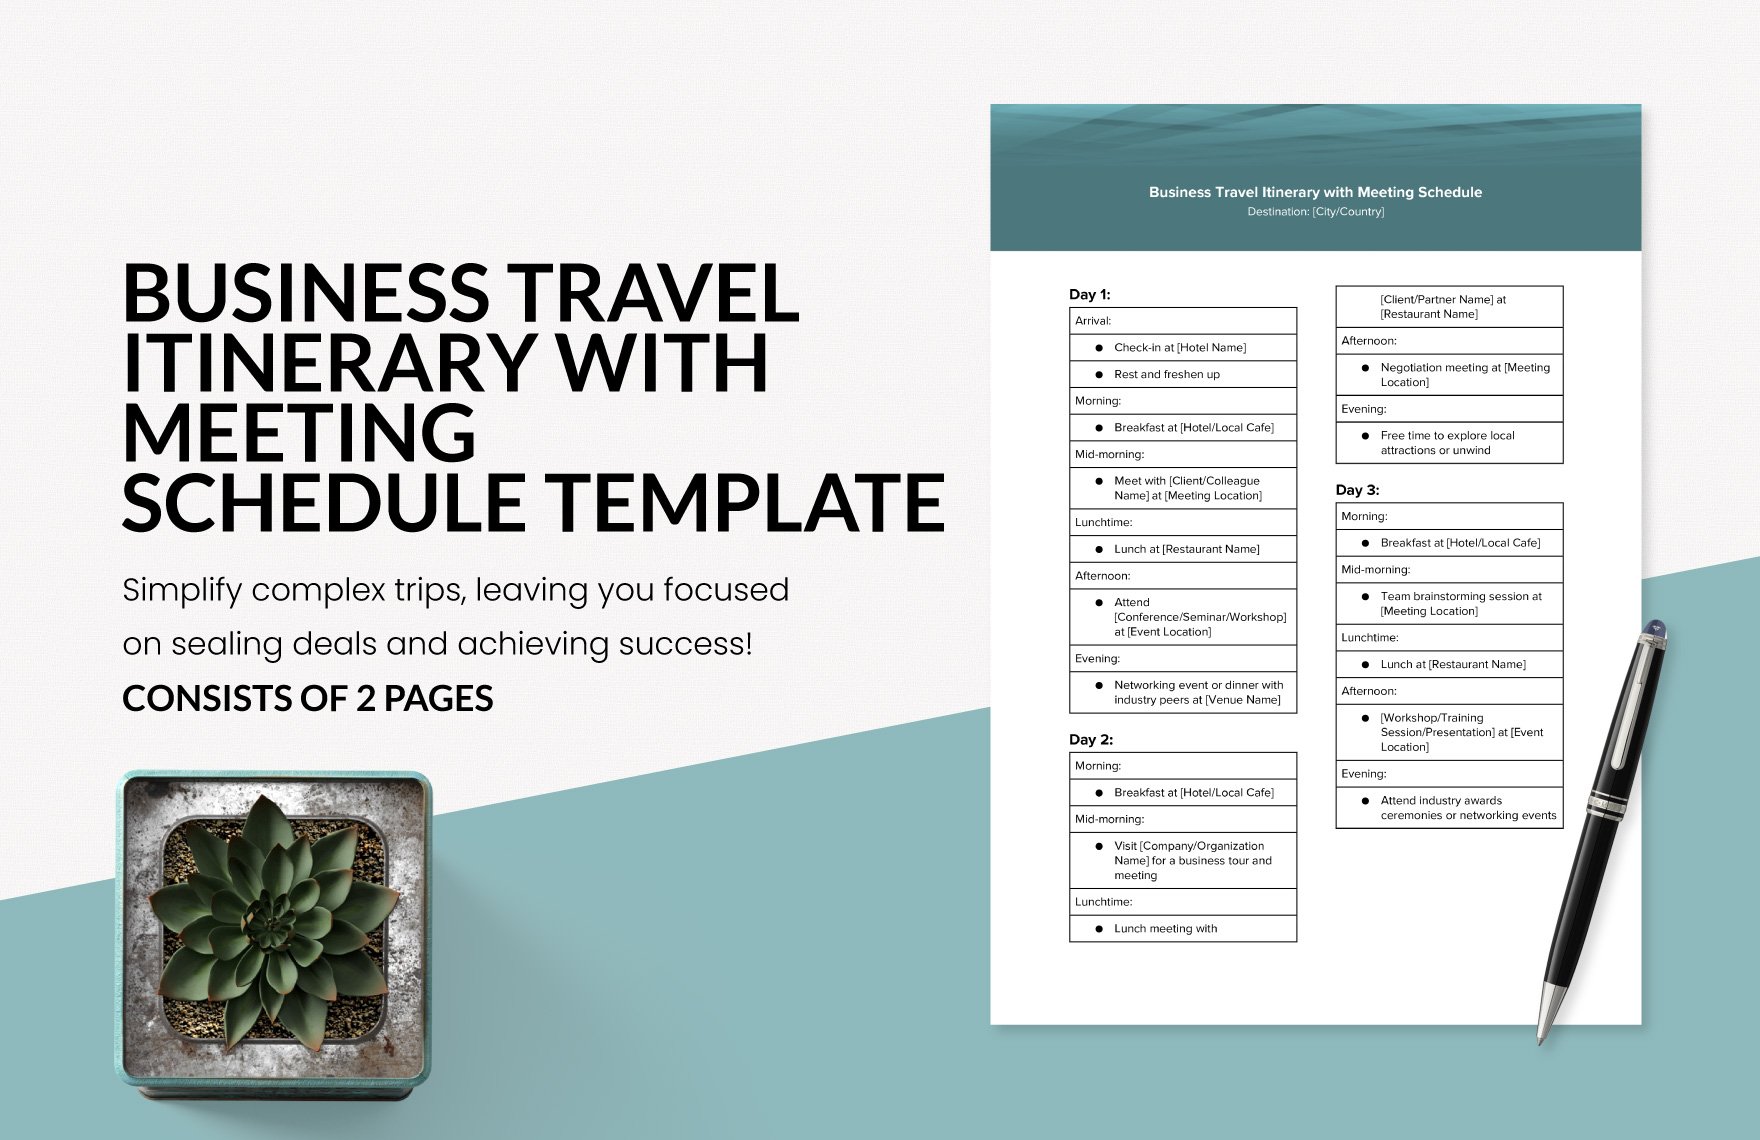 Business Travel Itinerary with Meeting Schedule Template